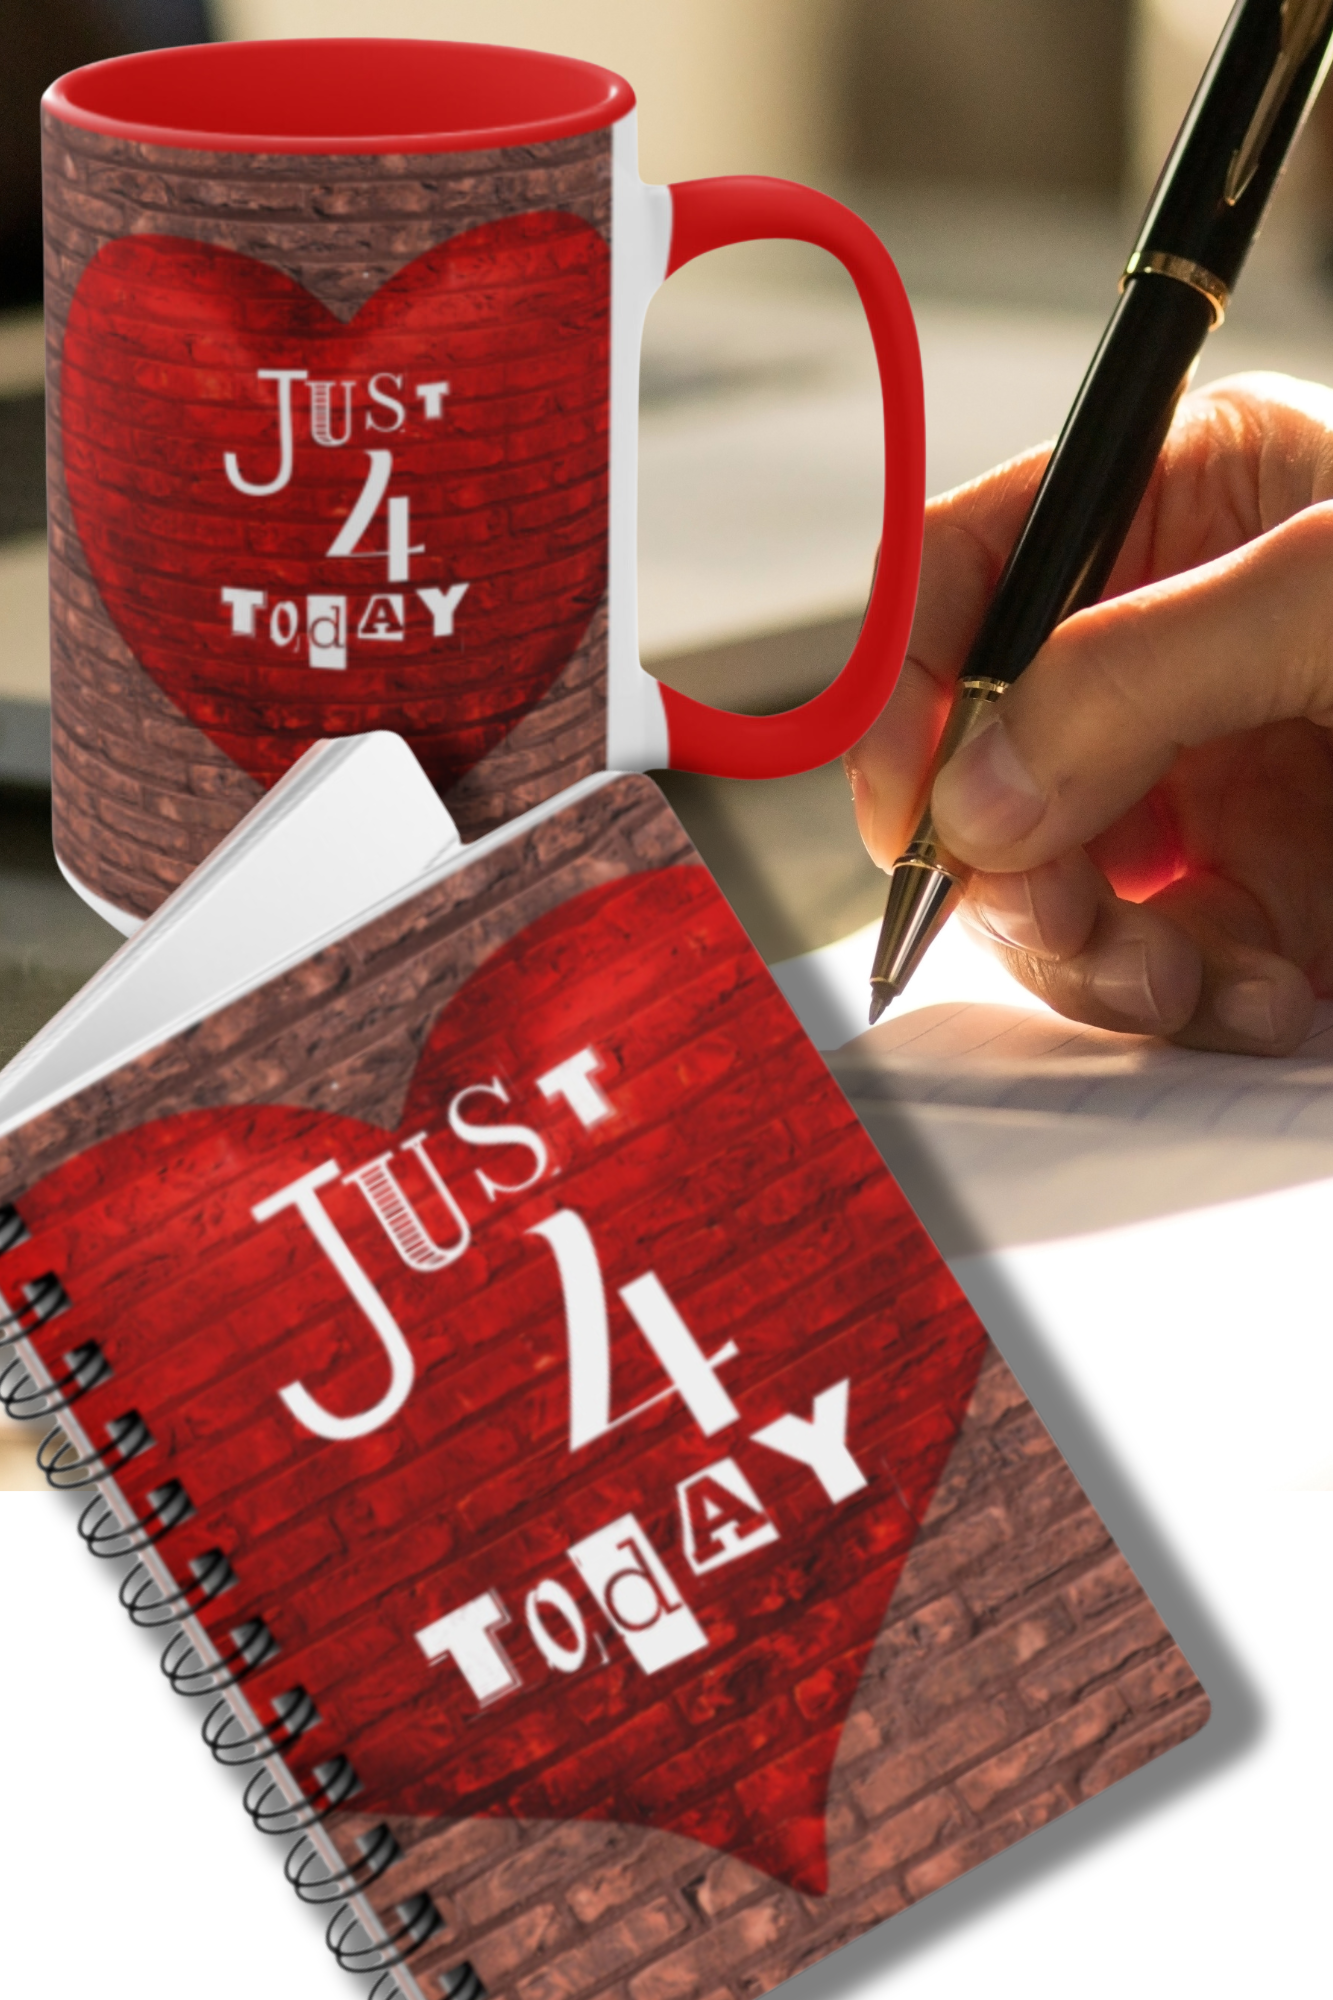 RECOVERY TOOLKIT "Just For Today" Bundle 15 oz. Mug With Matching Recovery Journal FREE SHIPPING